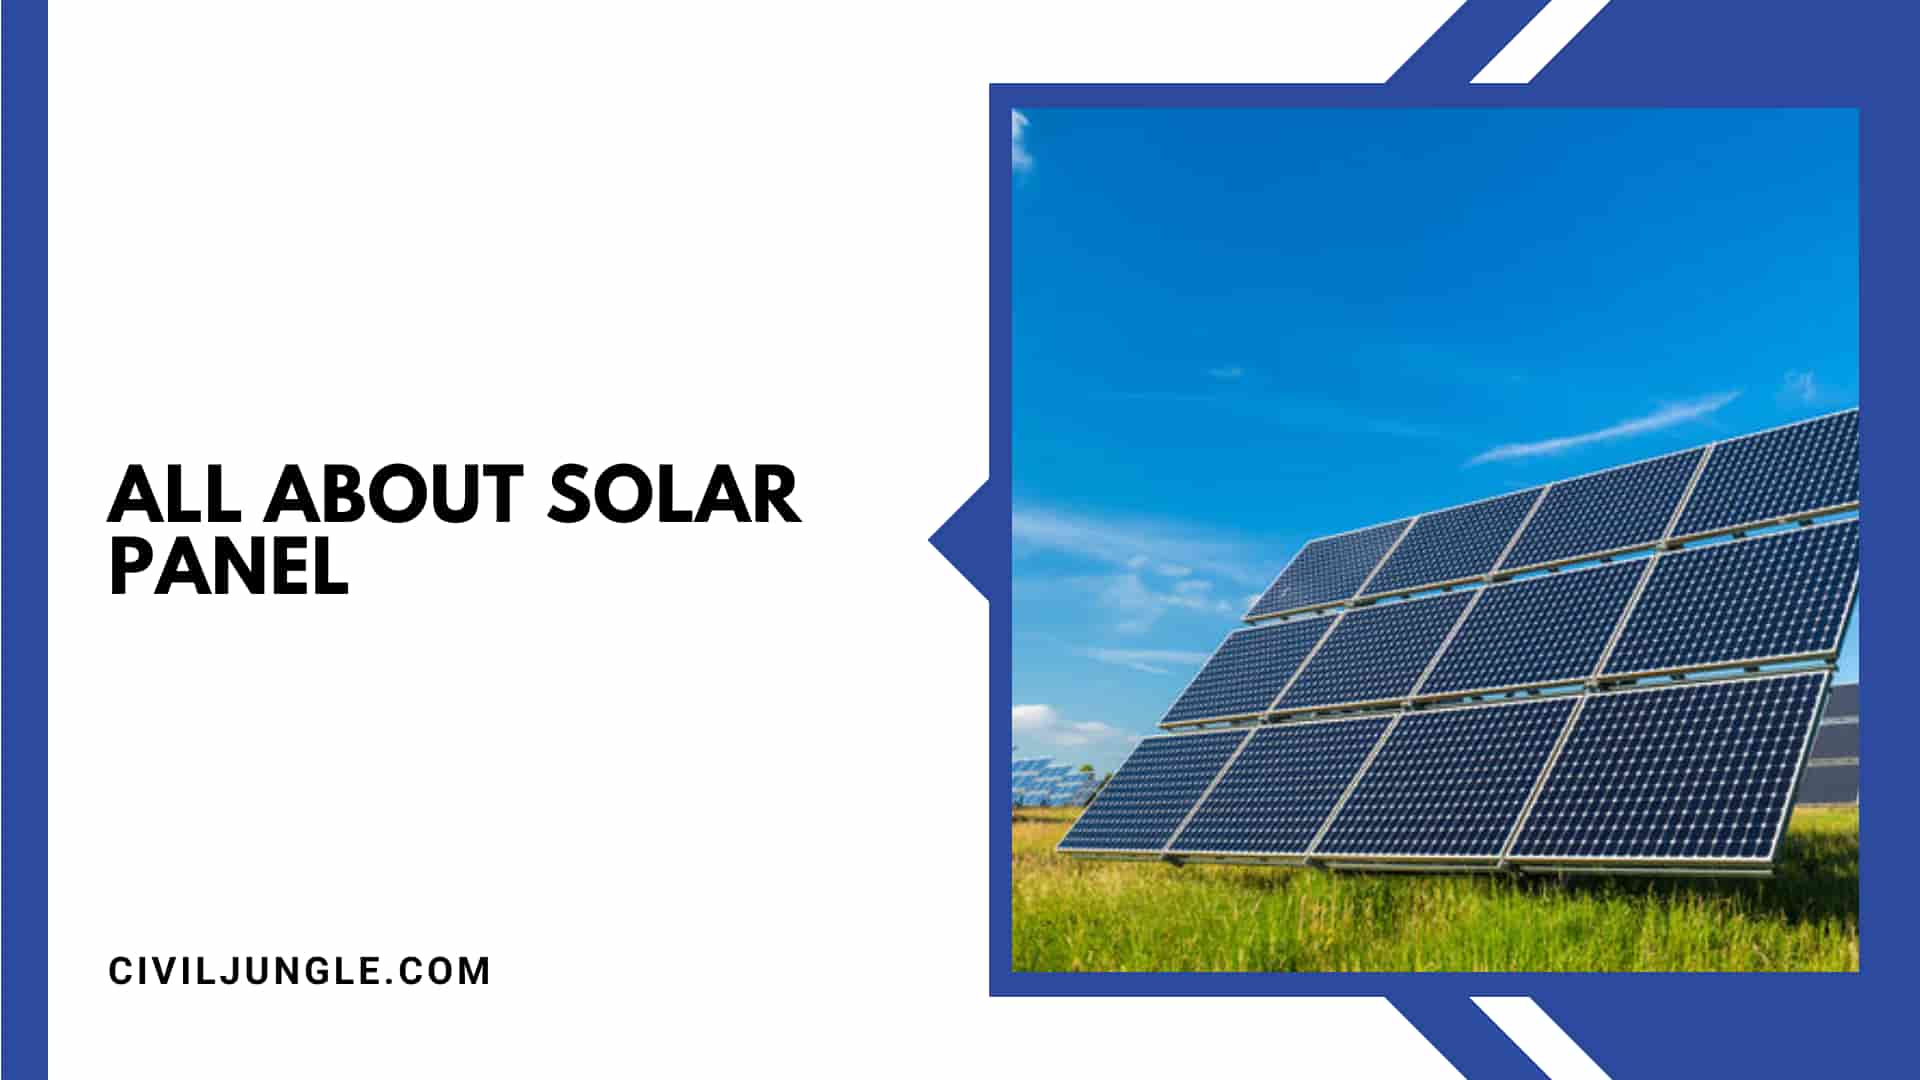 All About Solar Panel